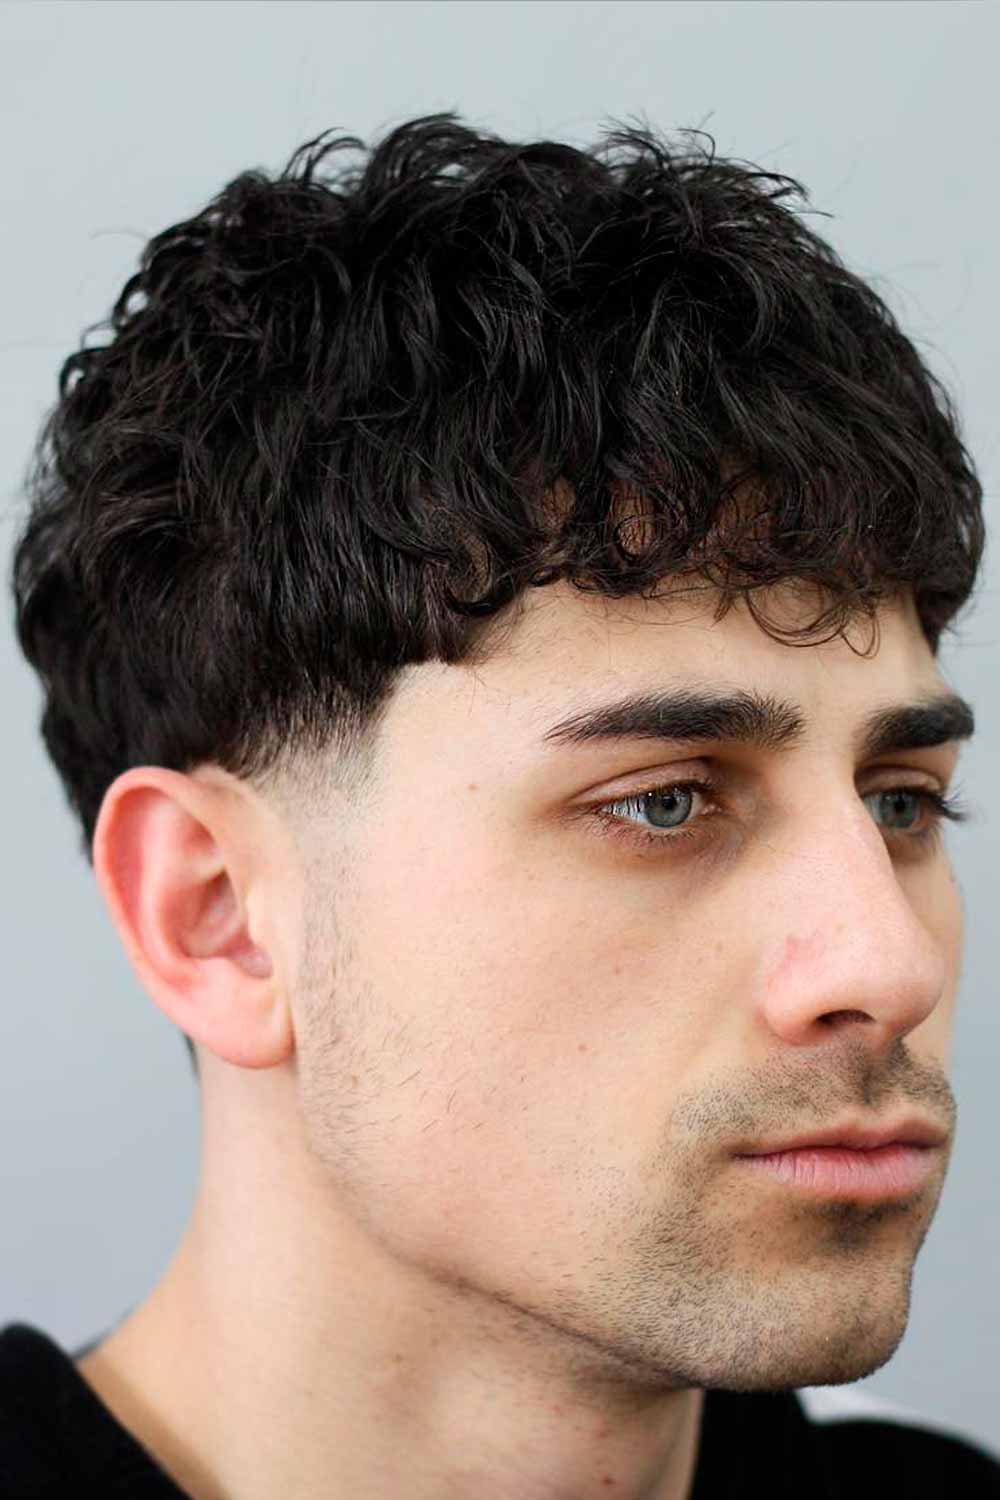 Low Taper Fade Curly Hairstyle #lowtaperfade #lowtaper #lowfade #taperfade #fade #taper